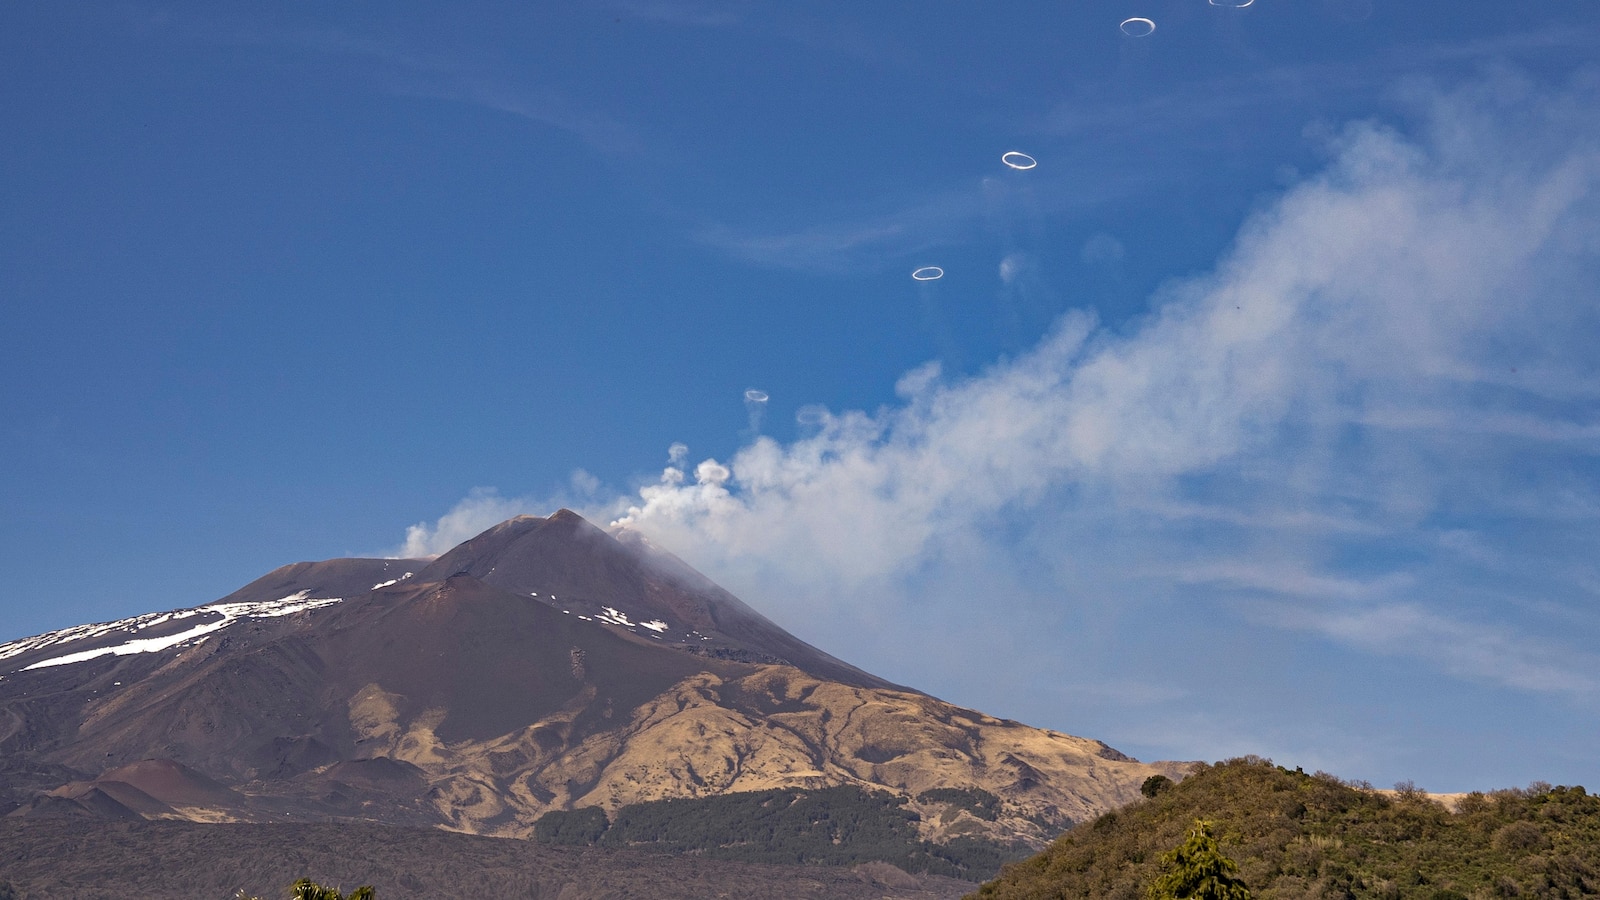 American tourist dies after sudden illness during excursion on Sicily's Mount Etna